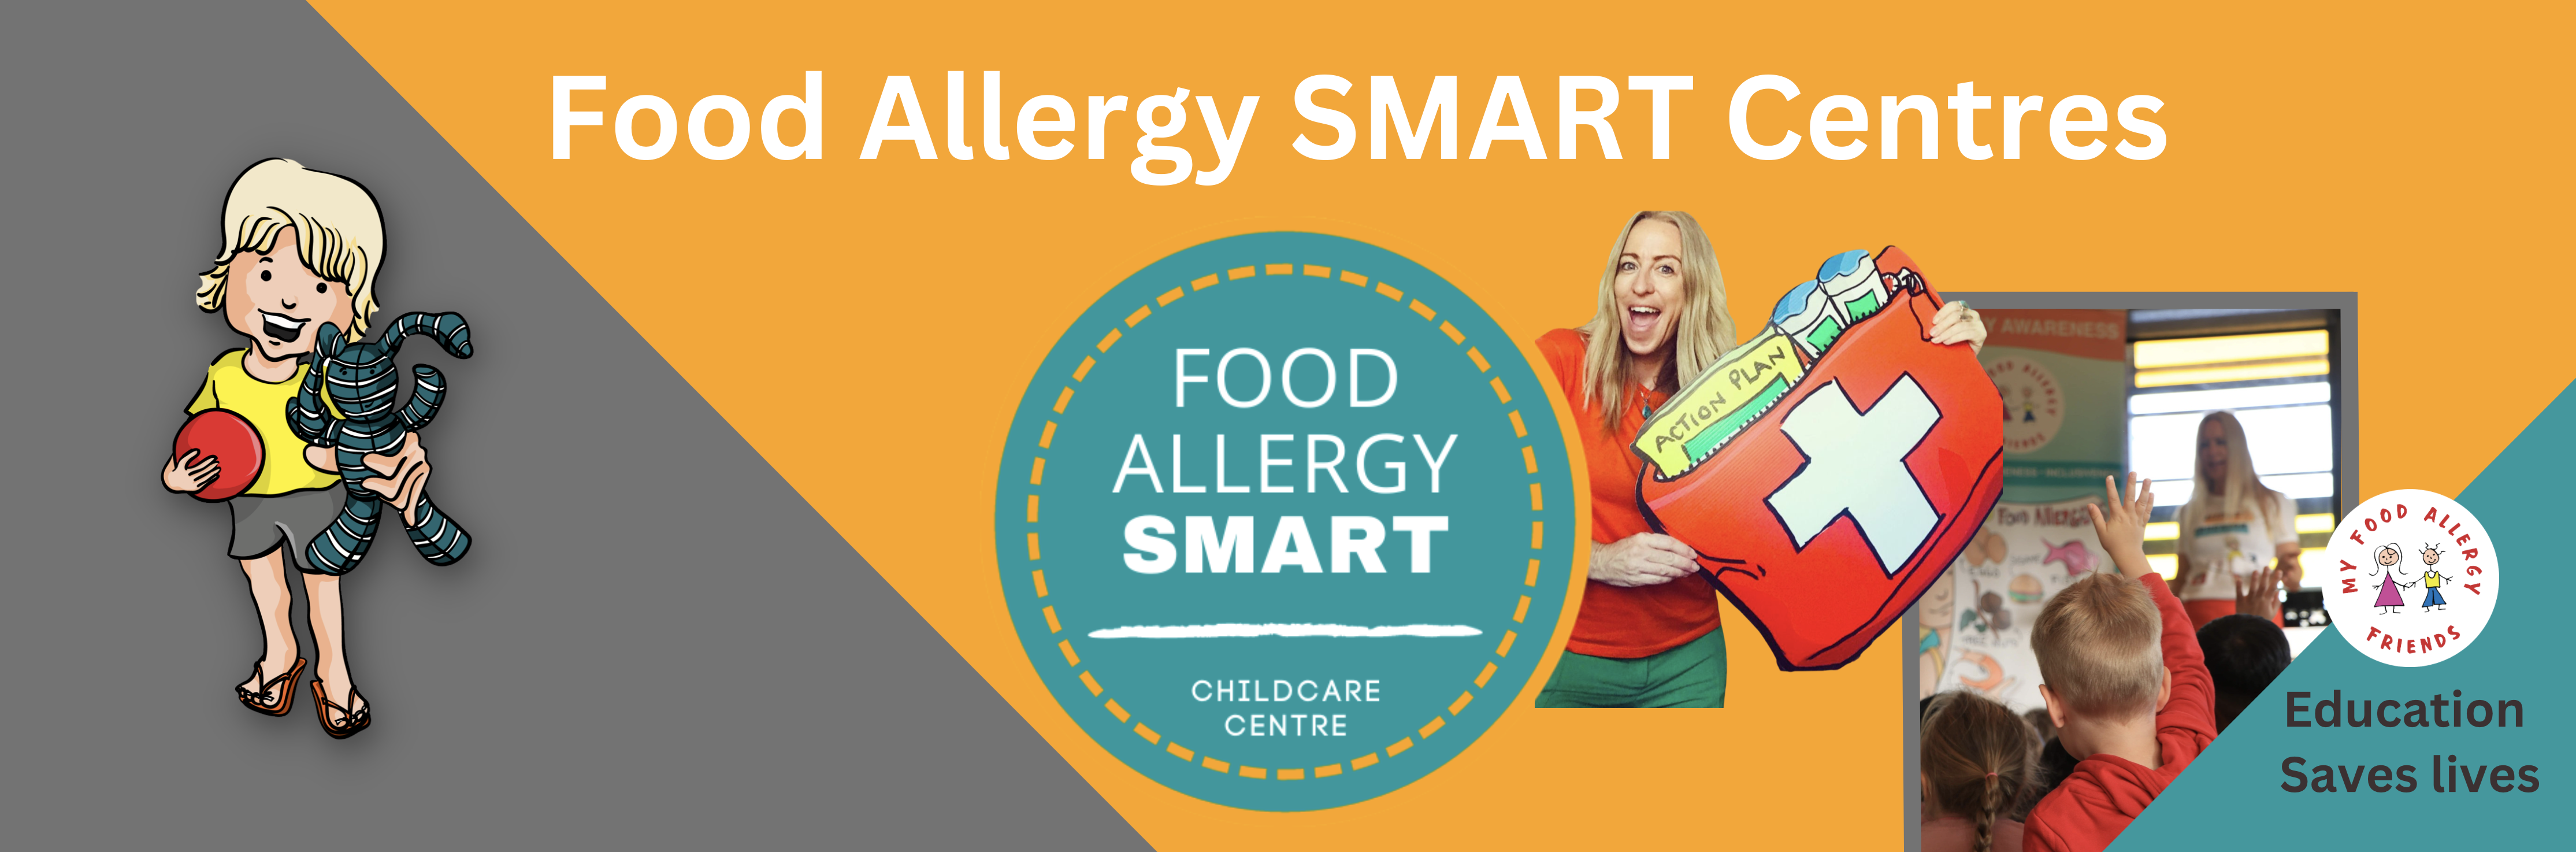 Food Allergy SMART Centres